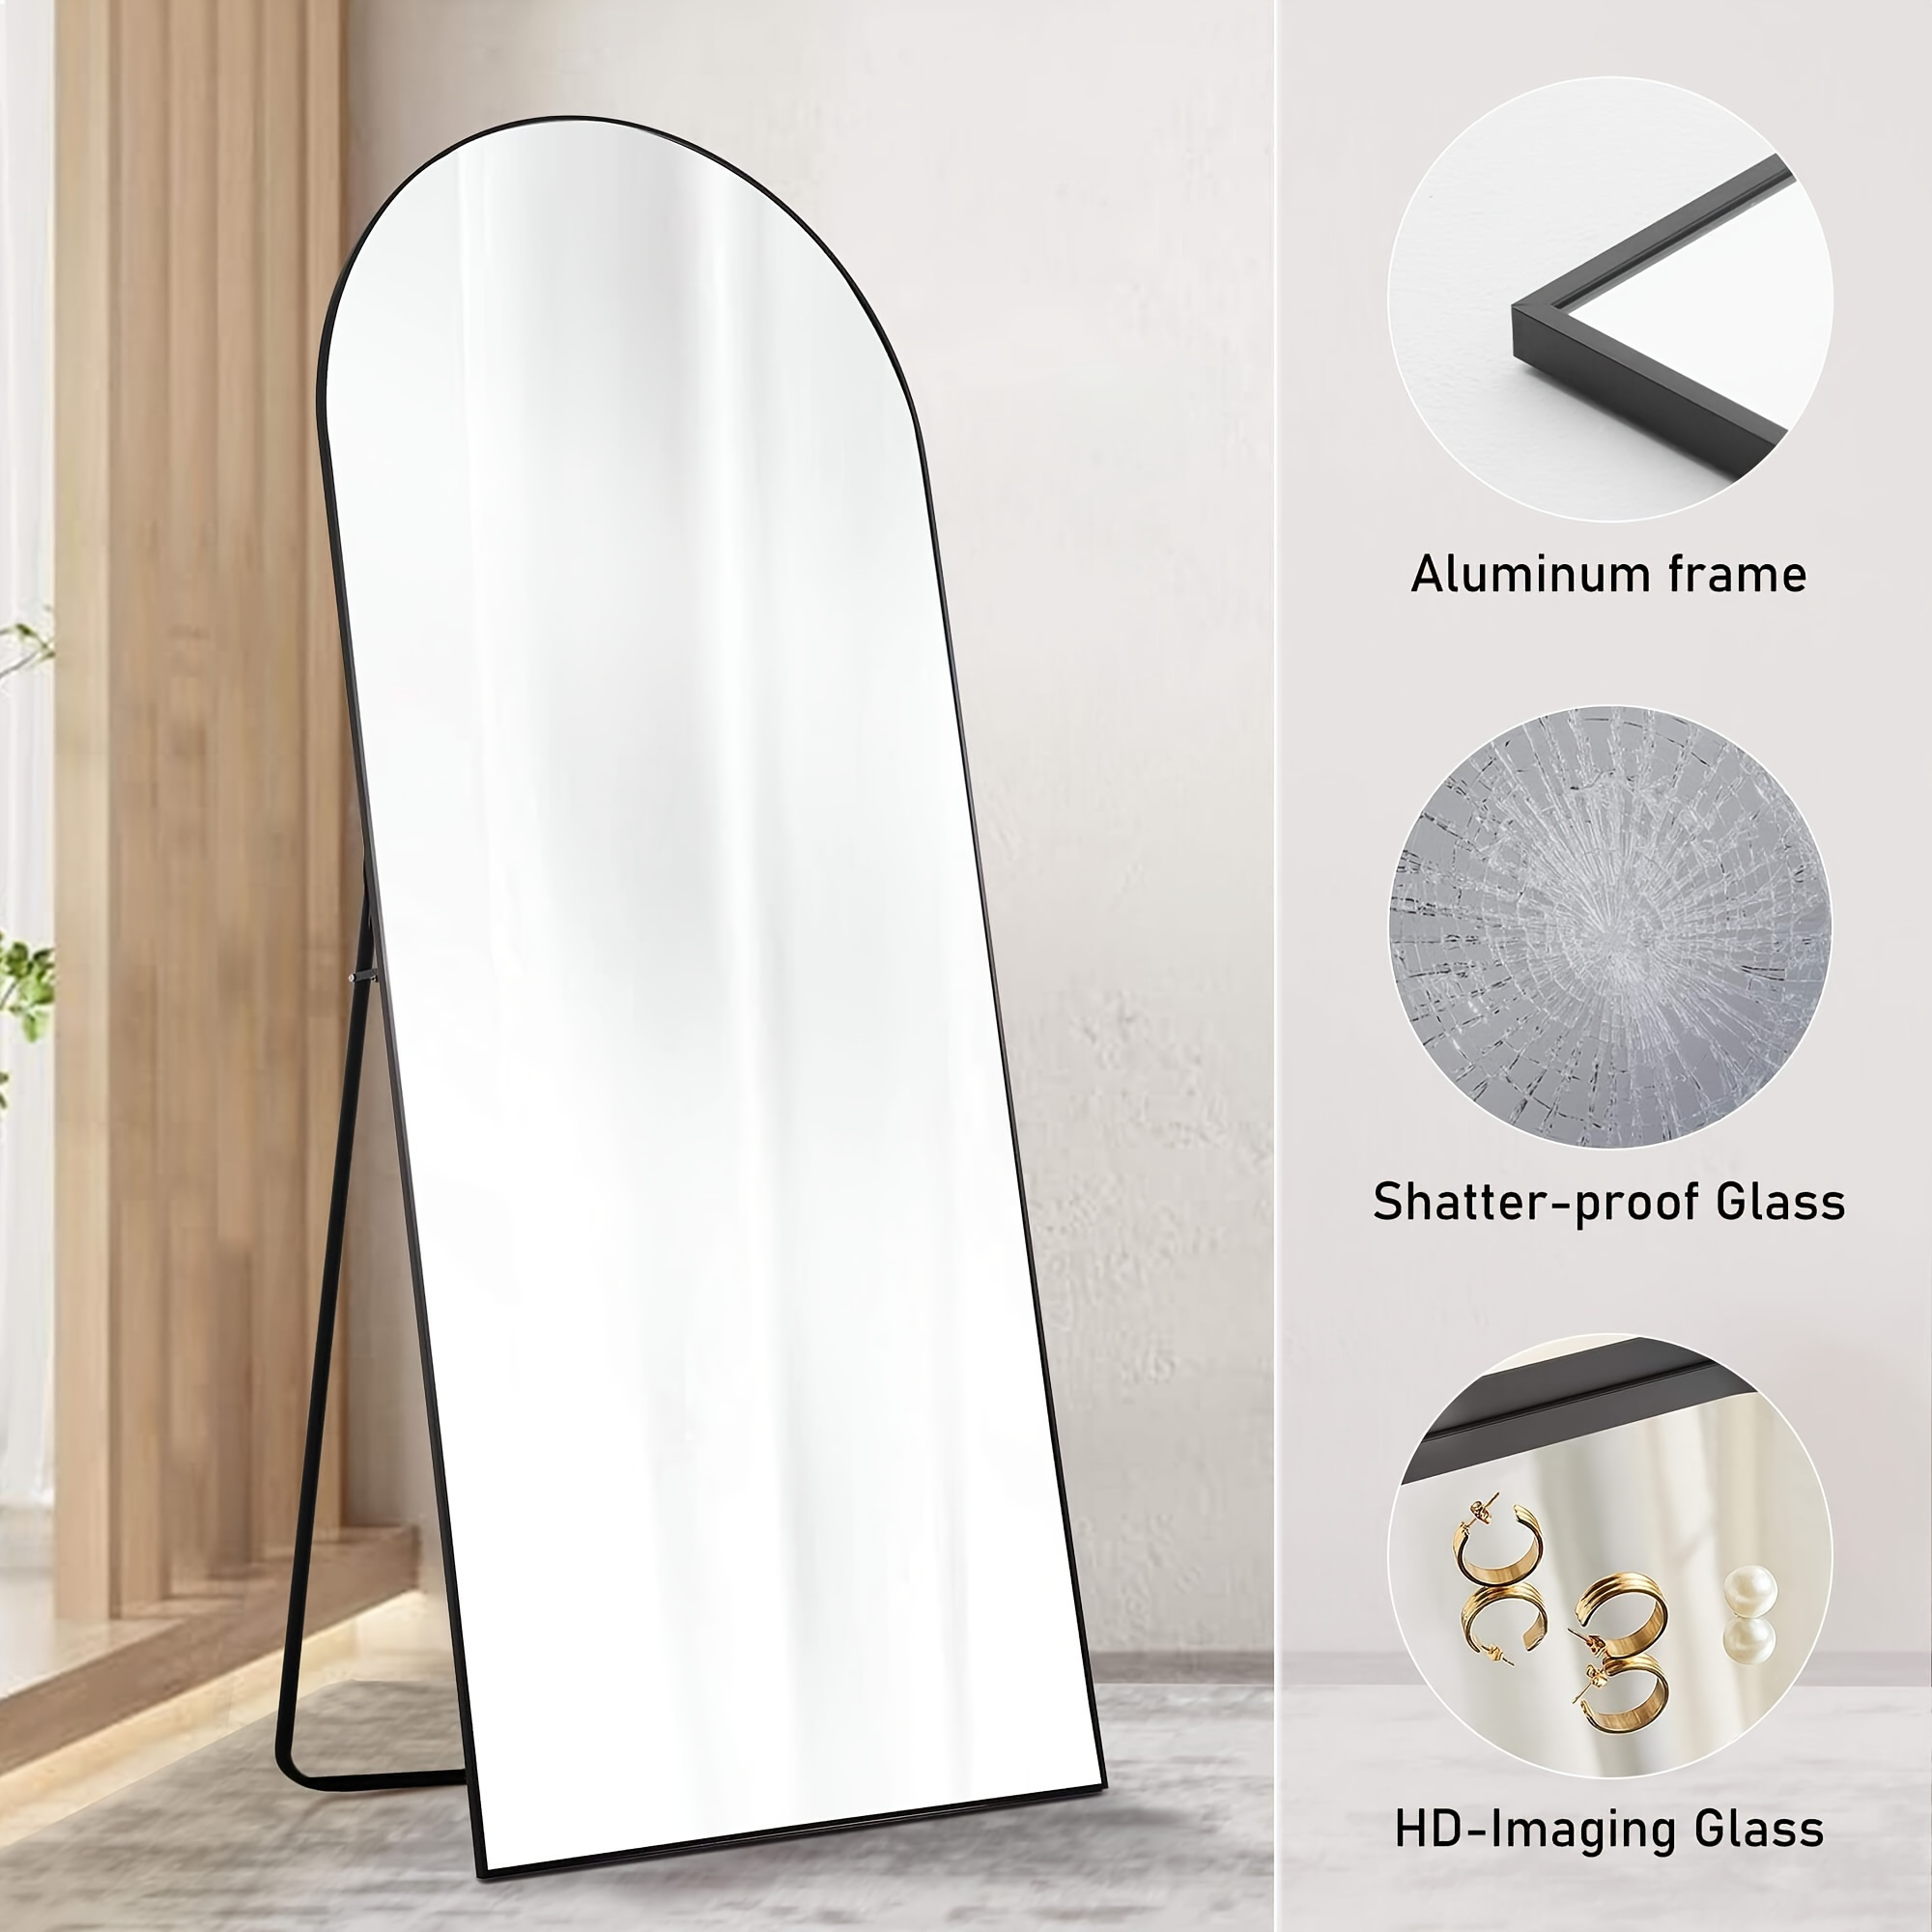 

Full Length Mirror Body Mirror Floor Standing Mirror Hanging Or Leaning Against Wall, Wall Mirror With Stand Aluminum Alloy Thin Frame For Living Room Bedroom Cloakroom Decor